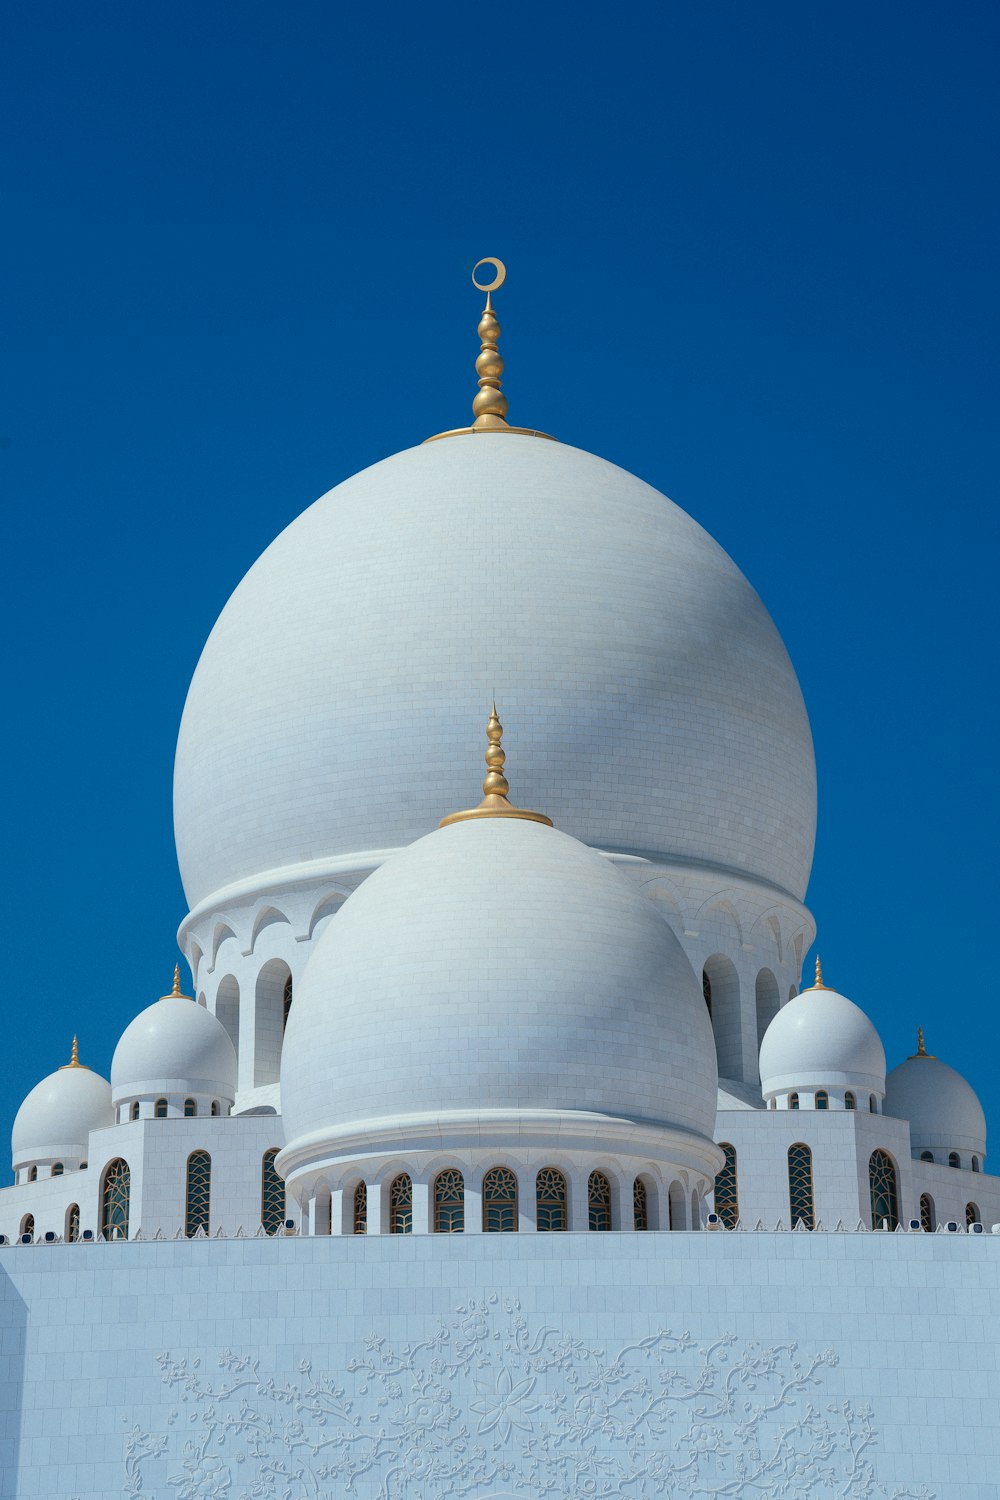 white concrete dome building under blue sky during daytime